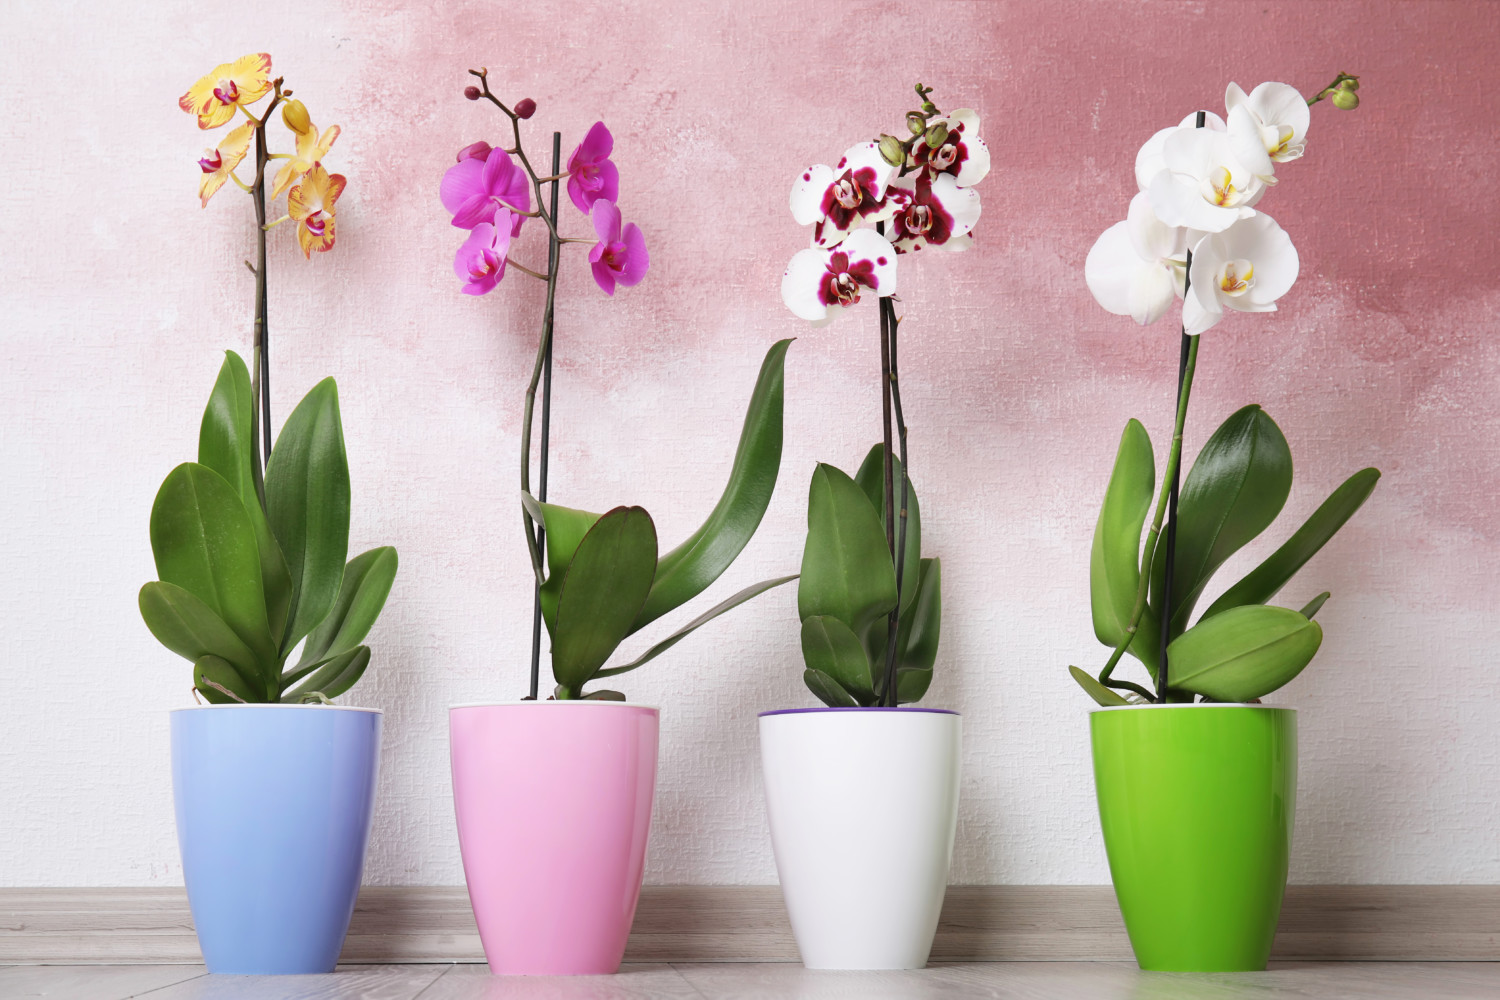 Four potted orchids in multiple colors